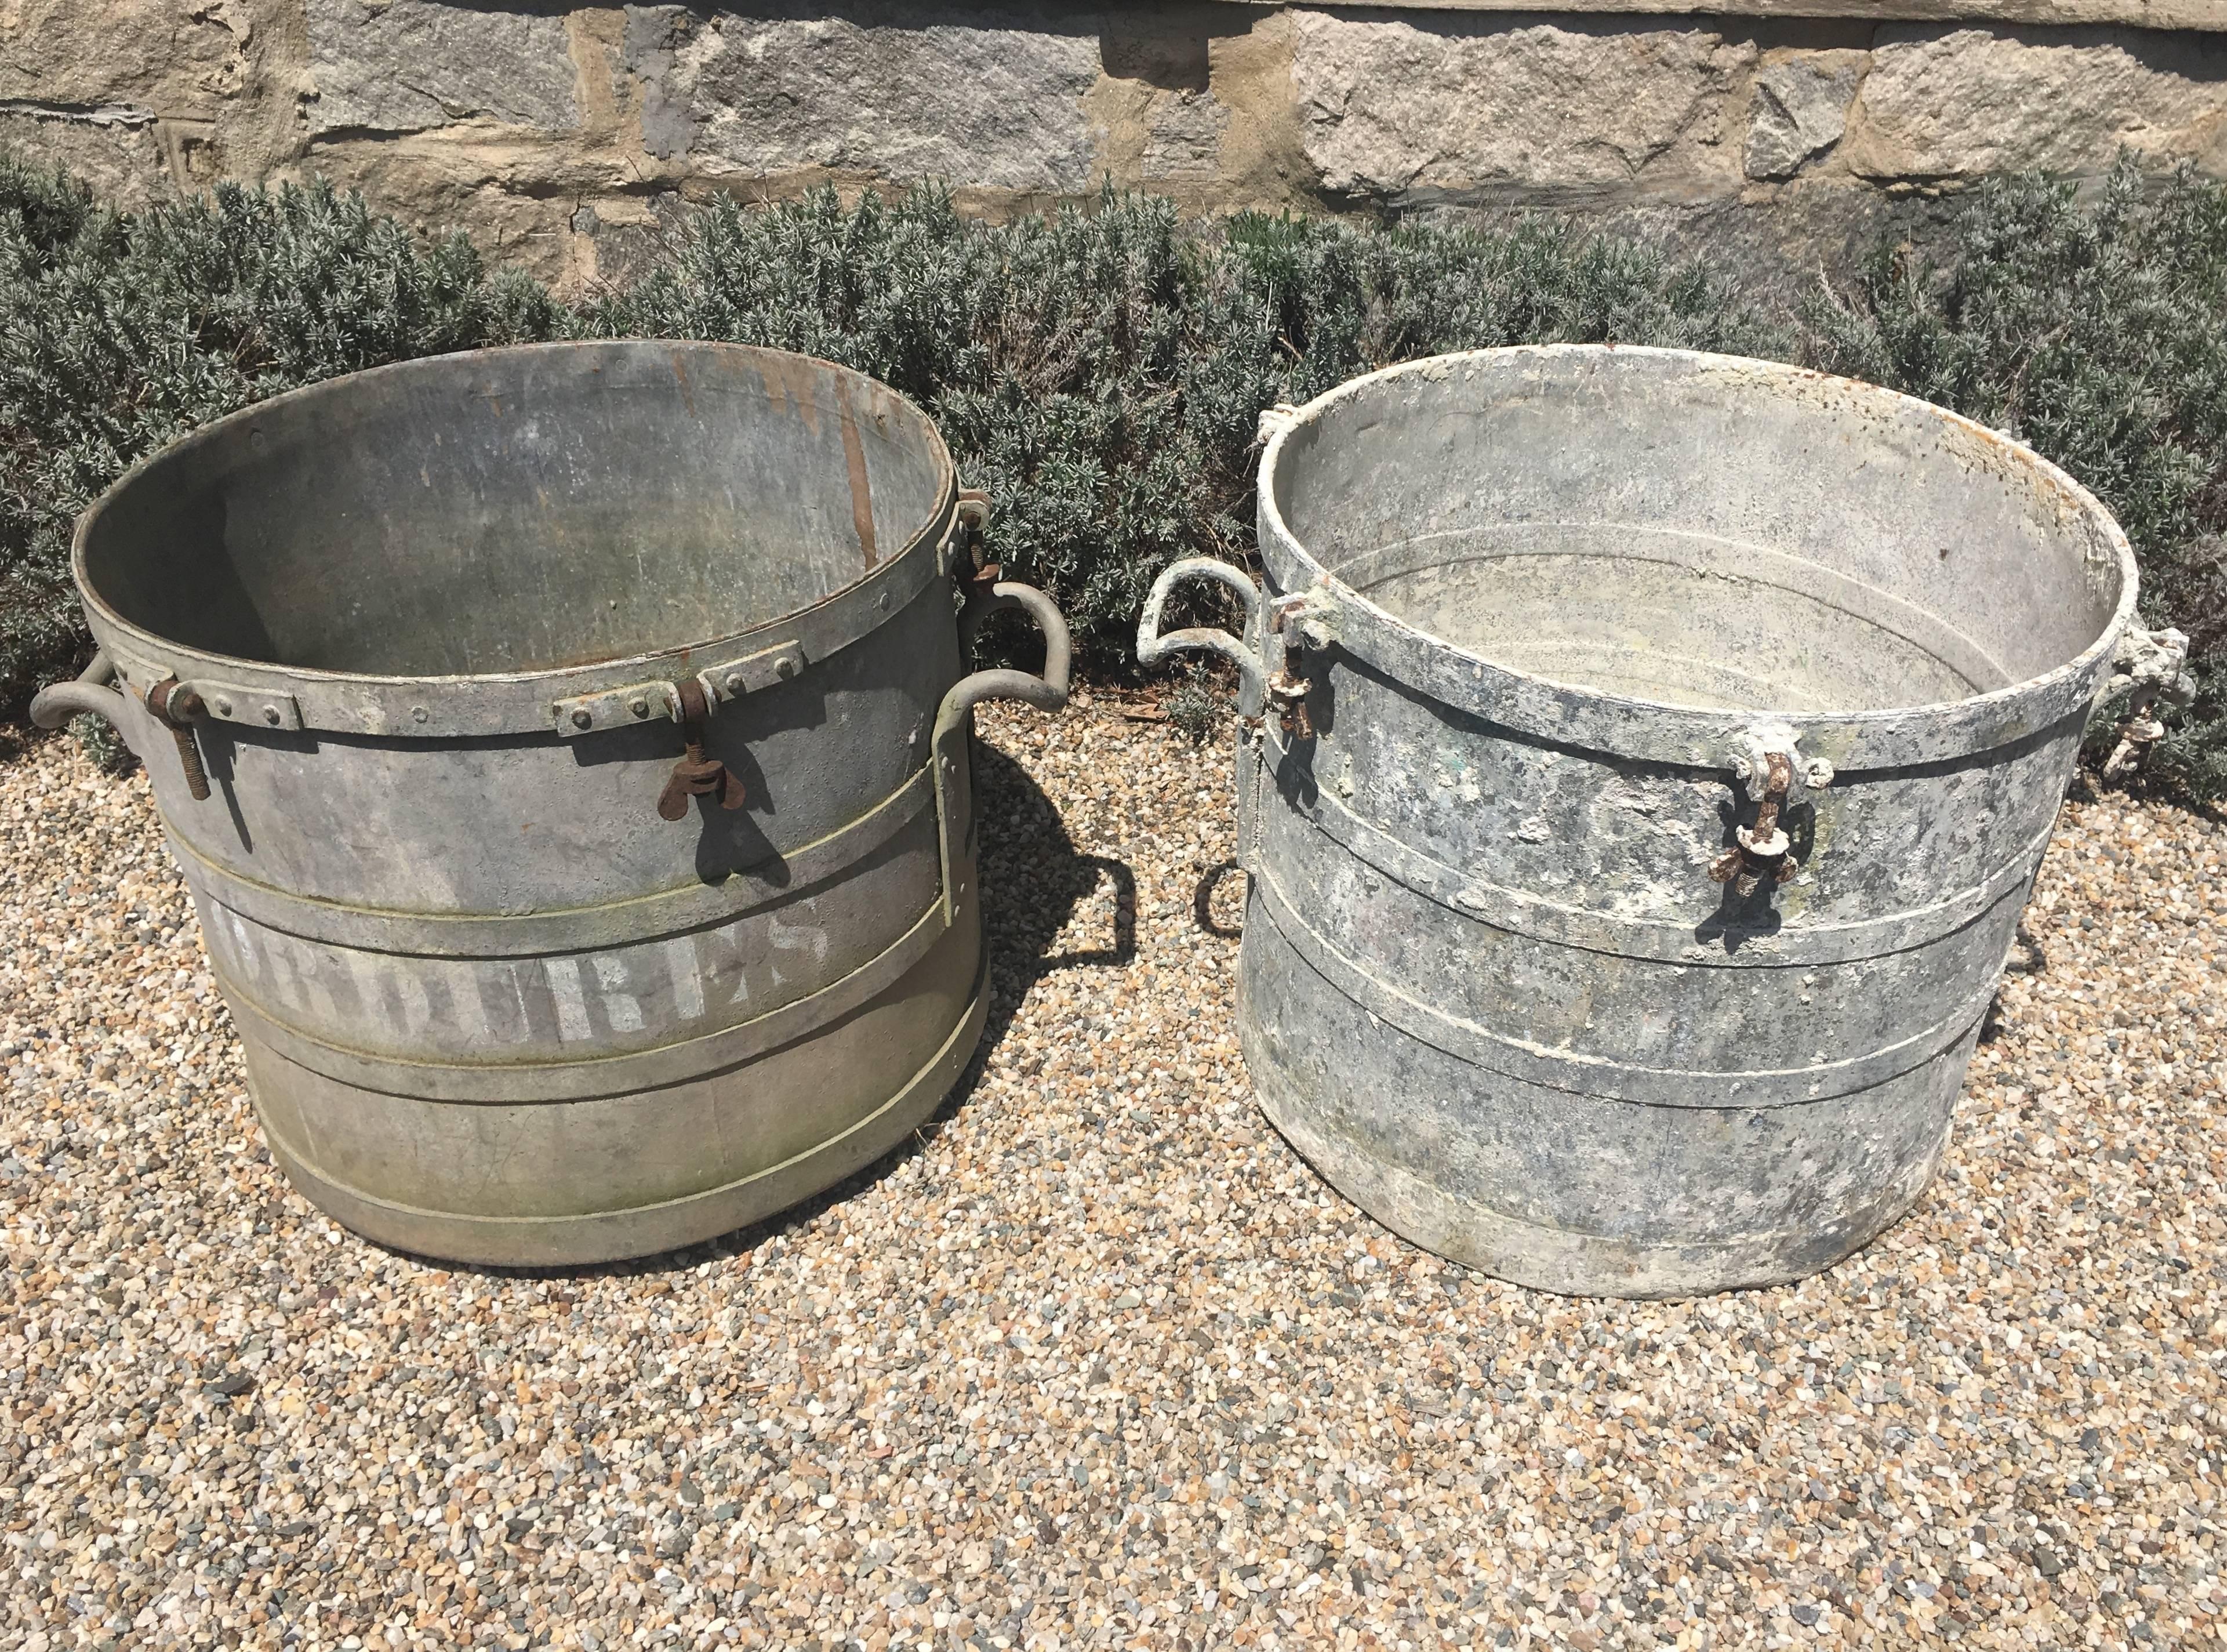 These large round French galvanized zinc planters were originally used for some Industrial function, but their beautifully weathered surface and great size makes them perfect candidates for planters. Large enough to hold topiary or a huge display of